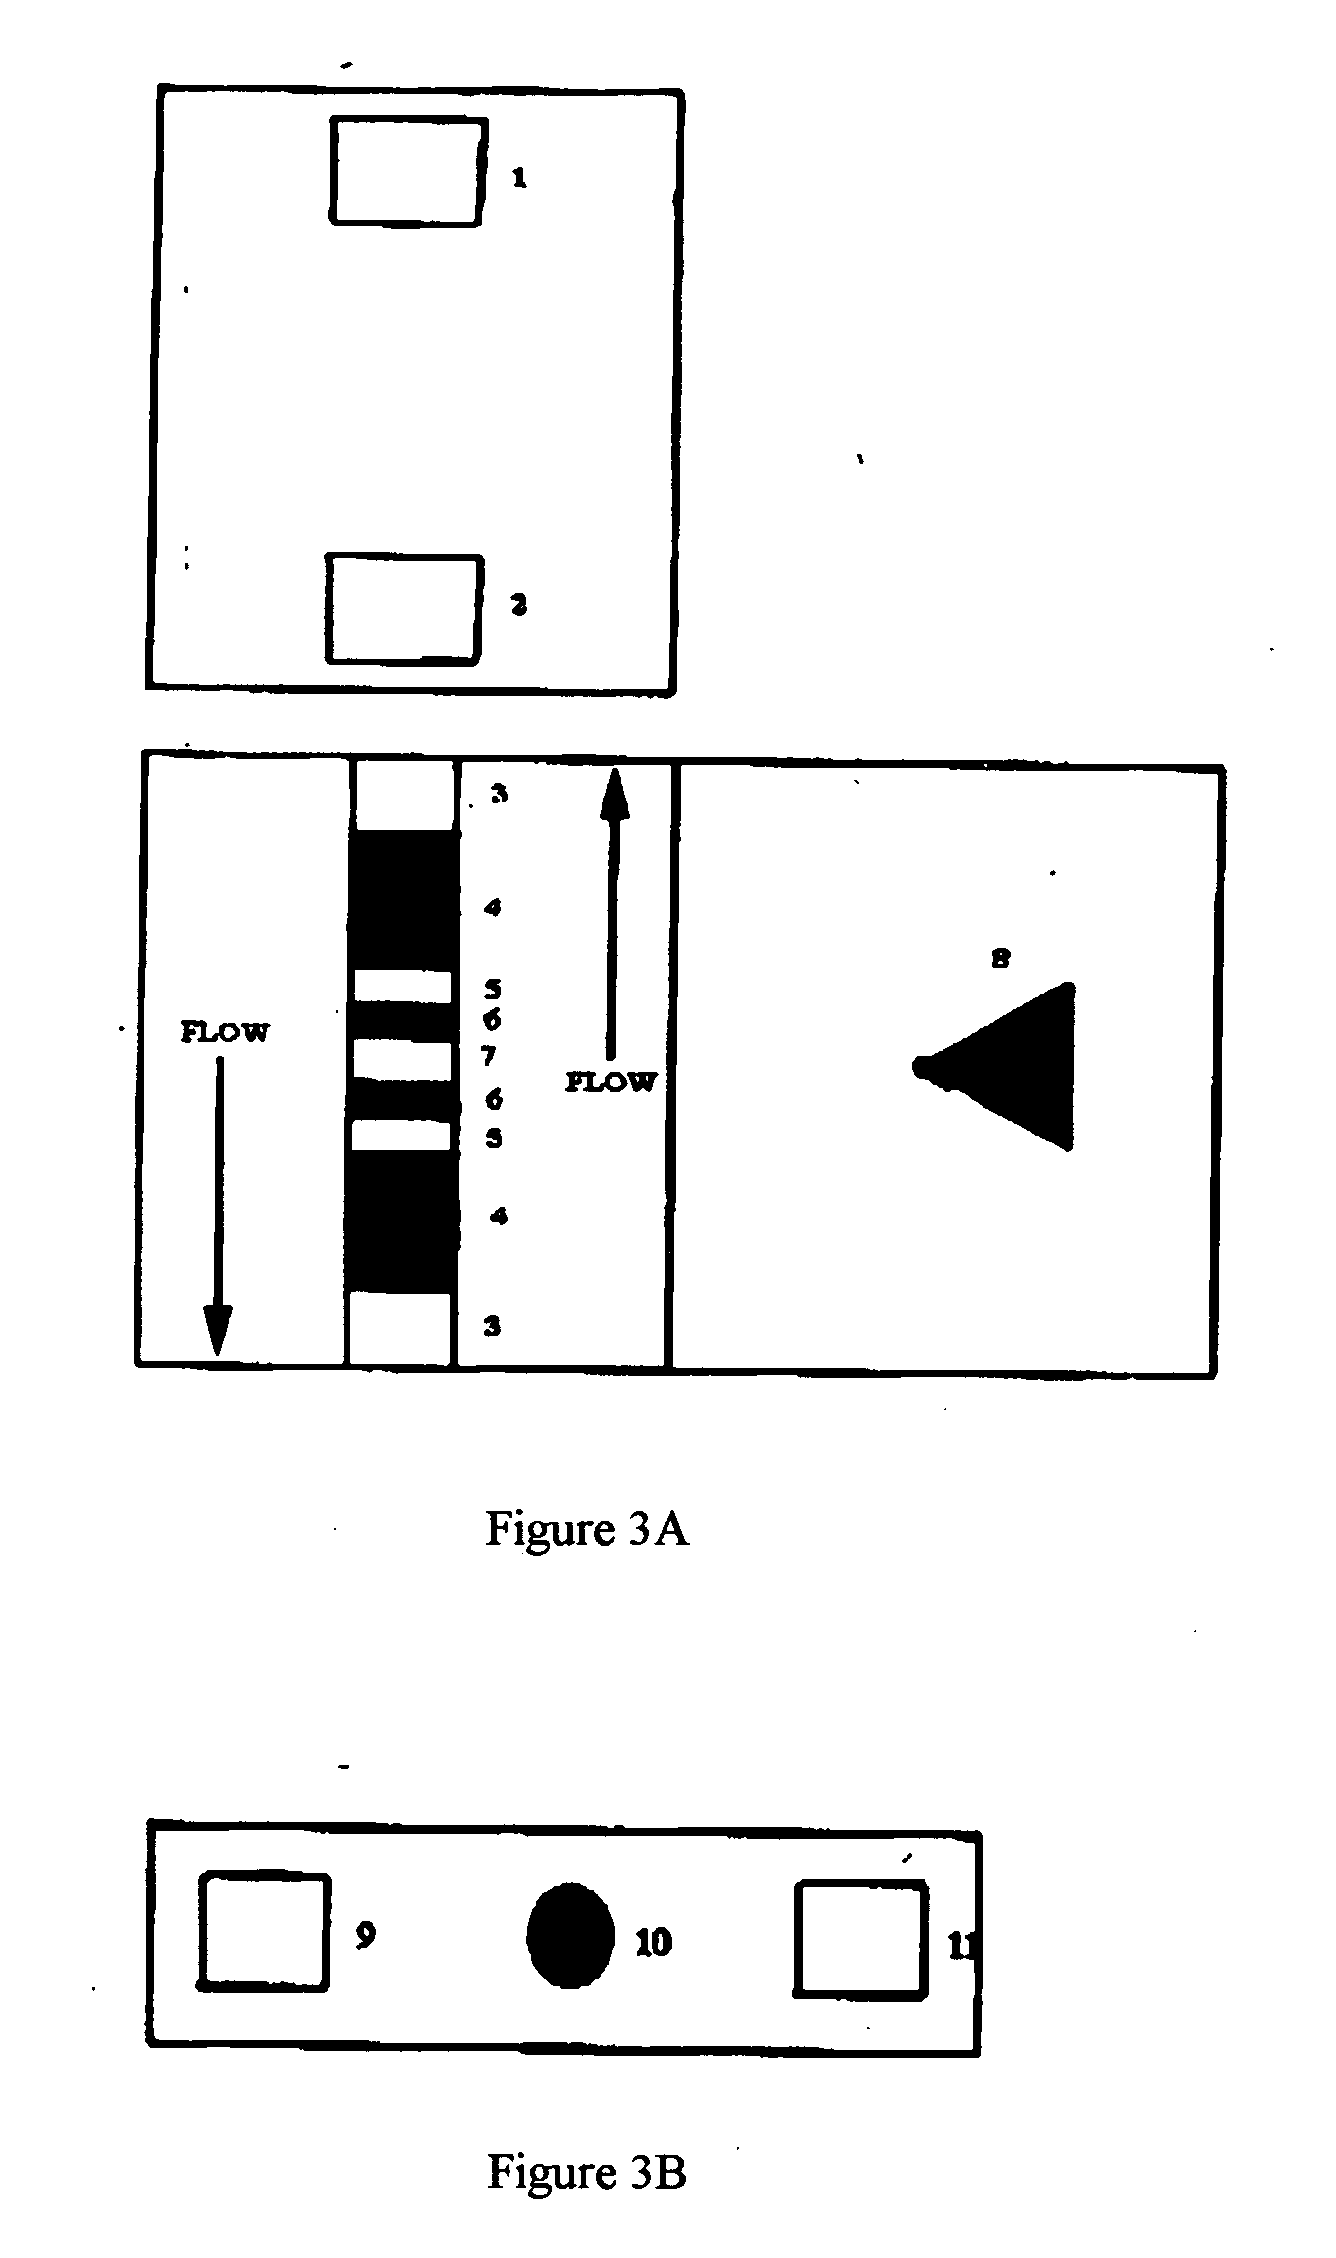 Chromatographic exclusion agglutination assay and methods of use thereof